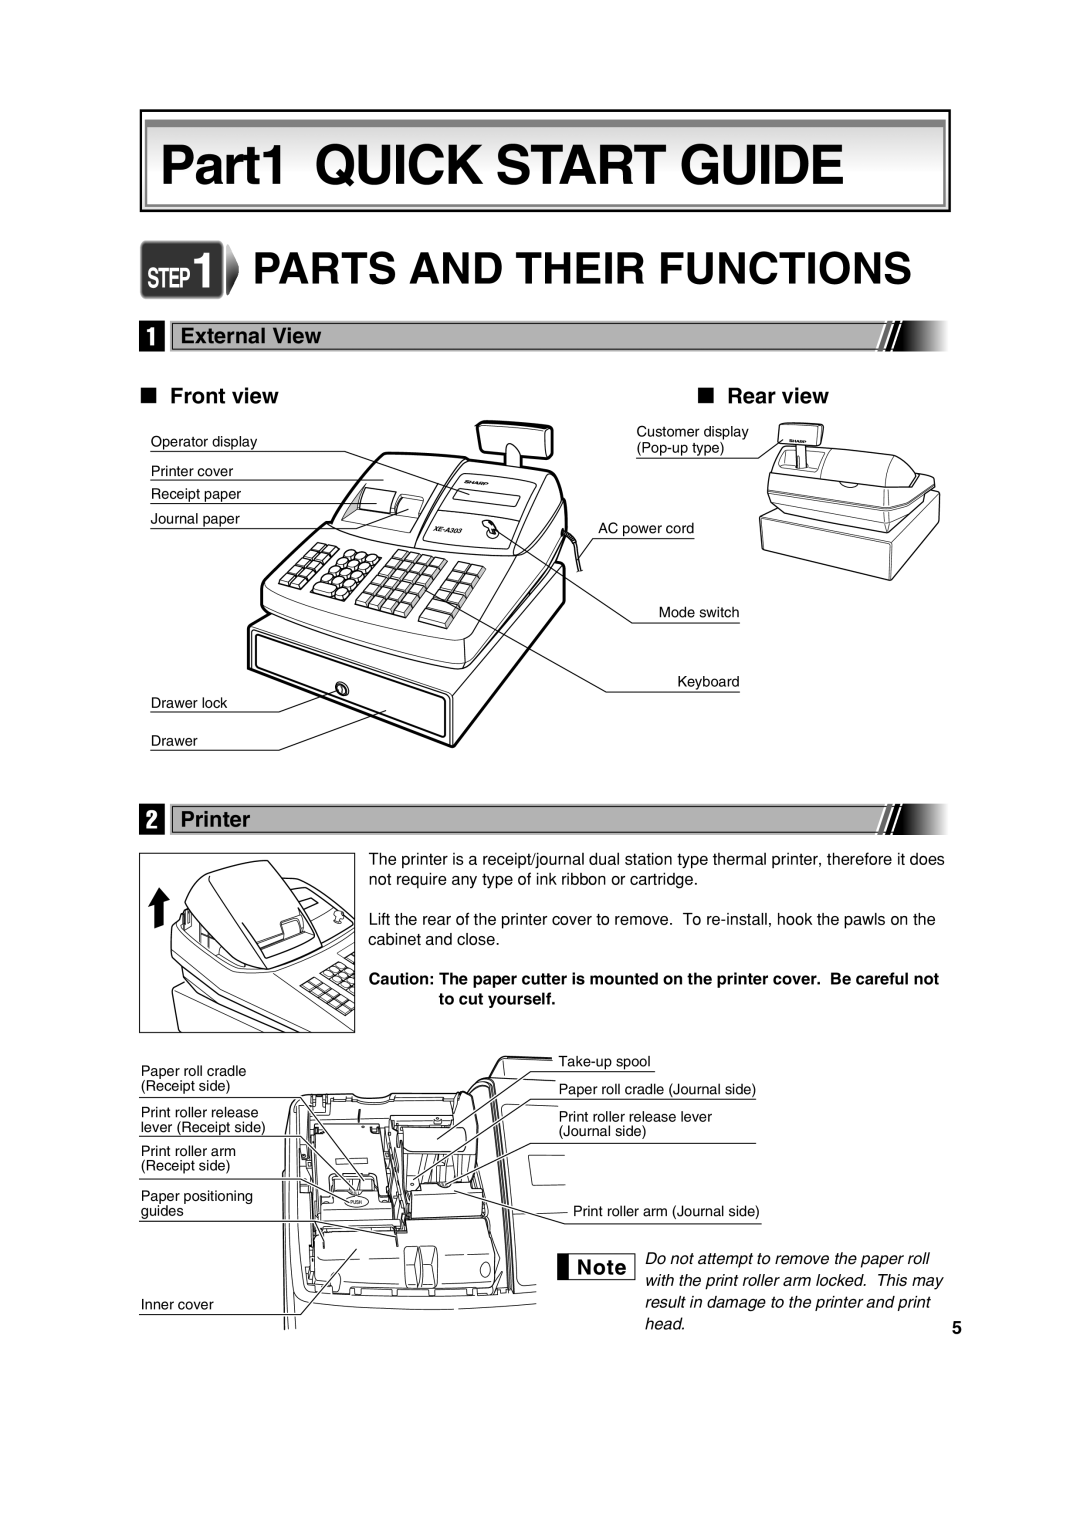 Sharp XE-A303 Part1 QUICK START GUIDE, Parts And Their Functions, External View, Front view, Rear view, Printer 